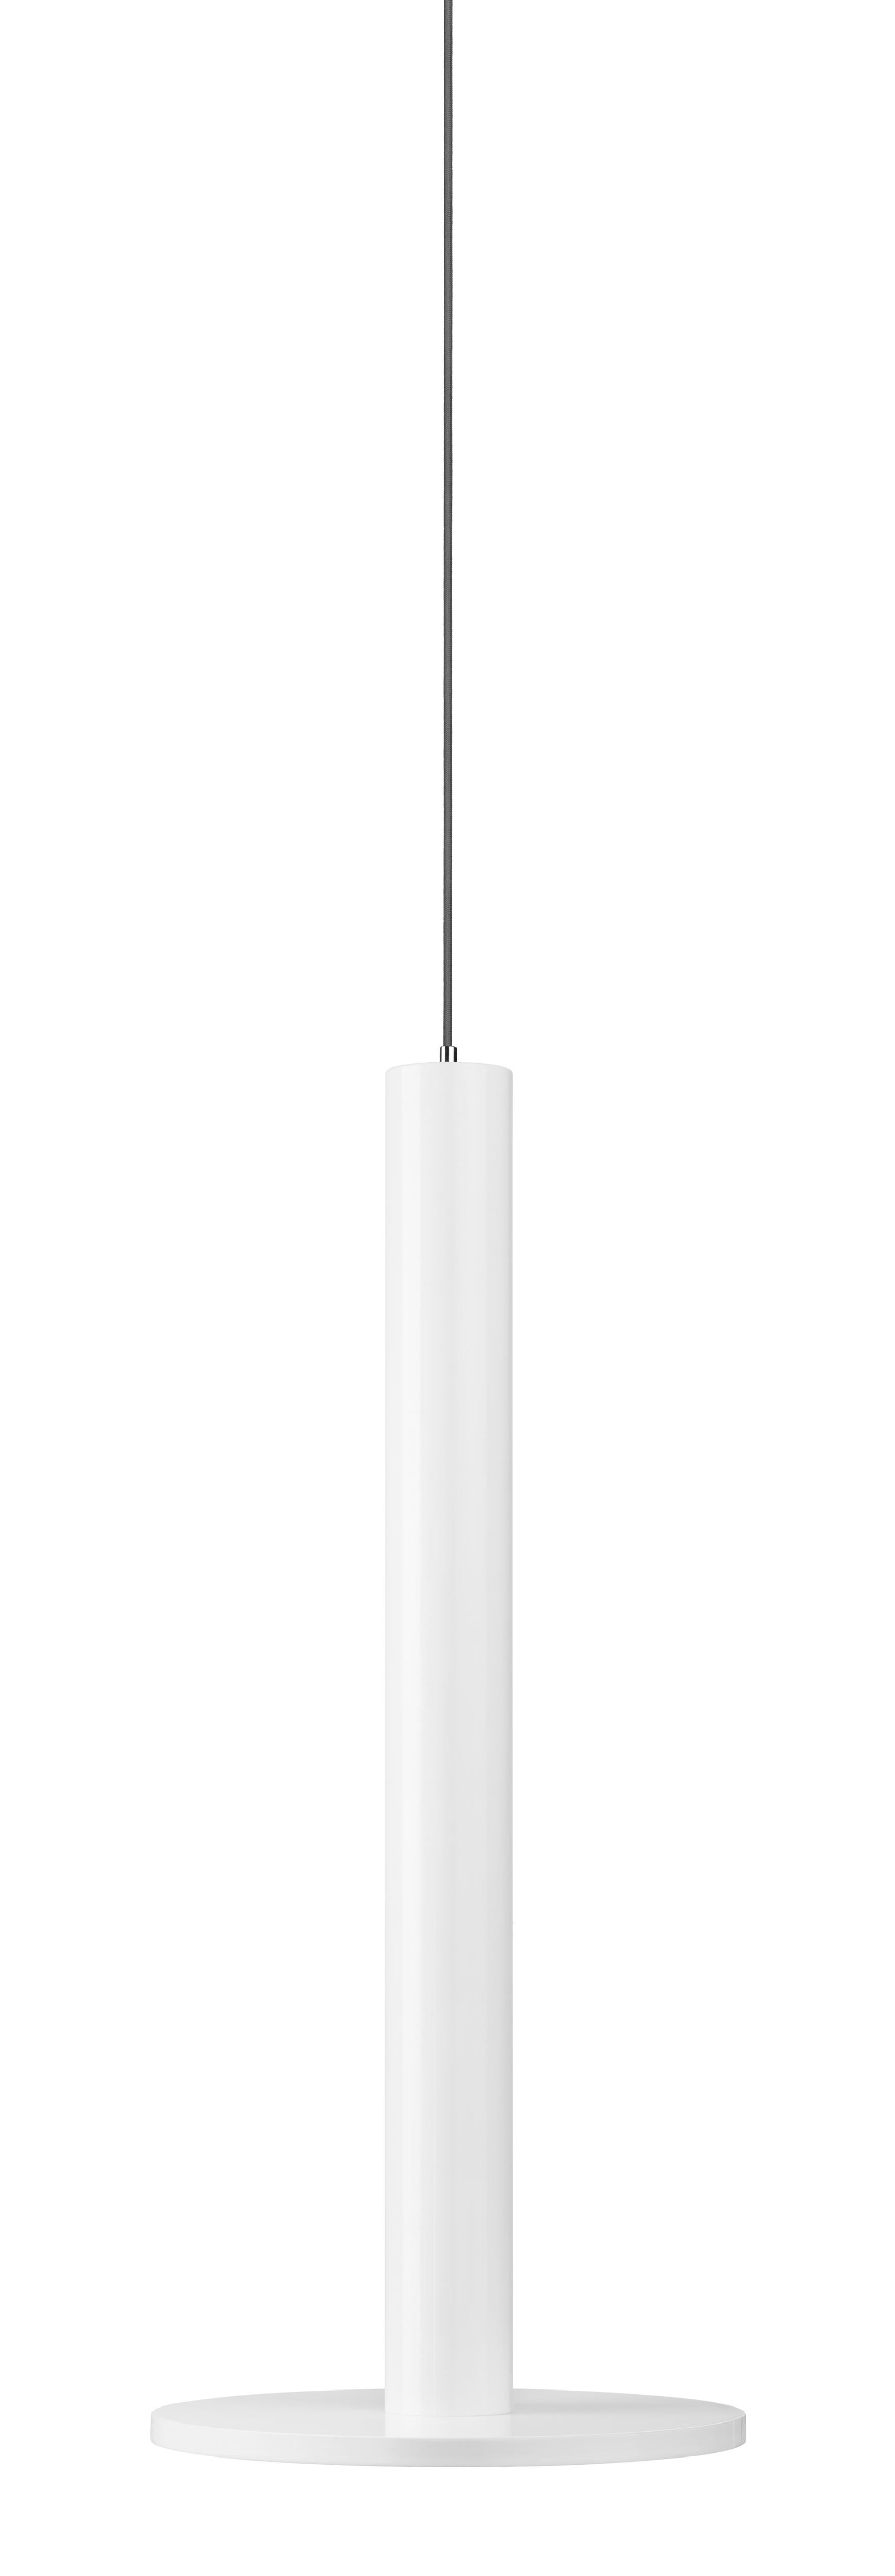 The minimalist Cielo pendant Series is expanding to include the stunning new Cielo XL, a taller and slimmer design offering premium machined aluminum finishes and boasting a warm and brilliant 1200 lumen output. Cielo XL is scaled perfectly for